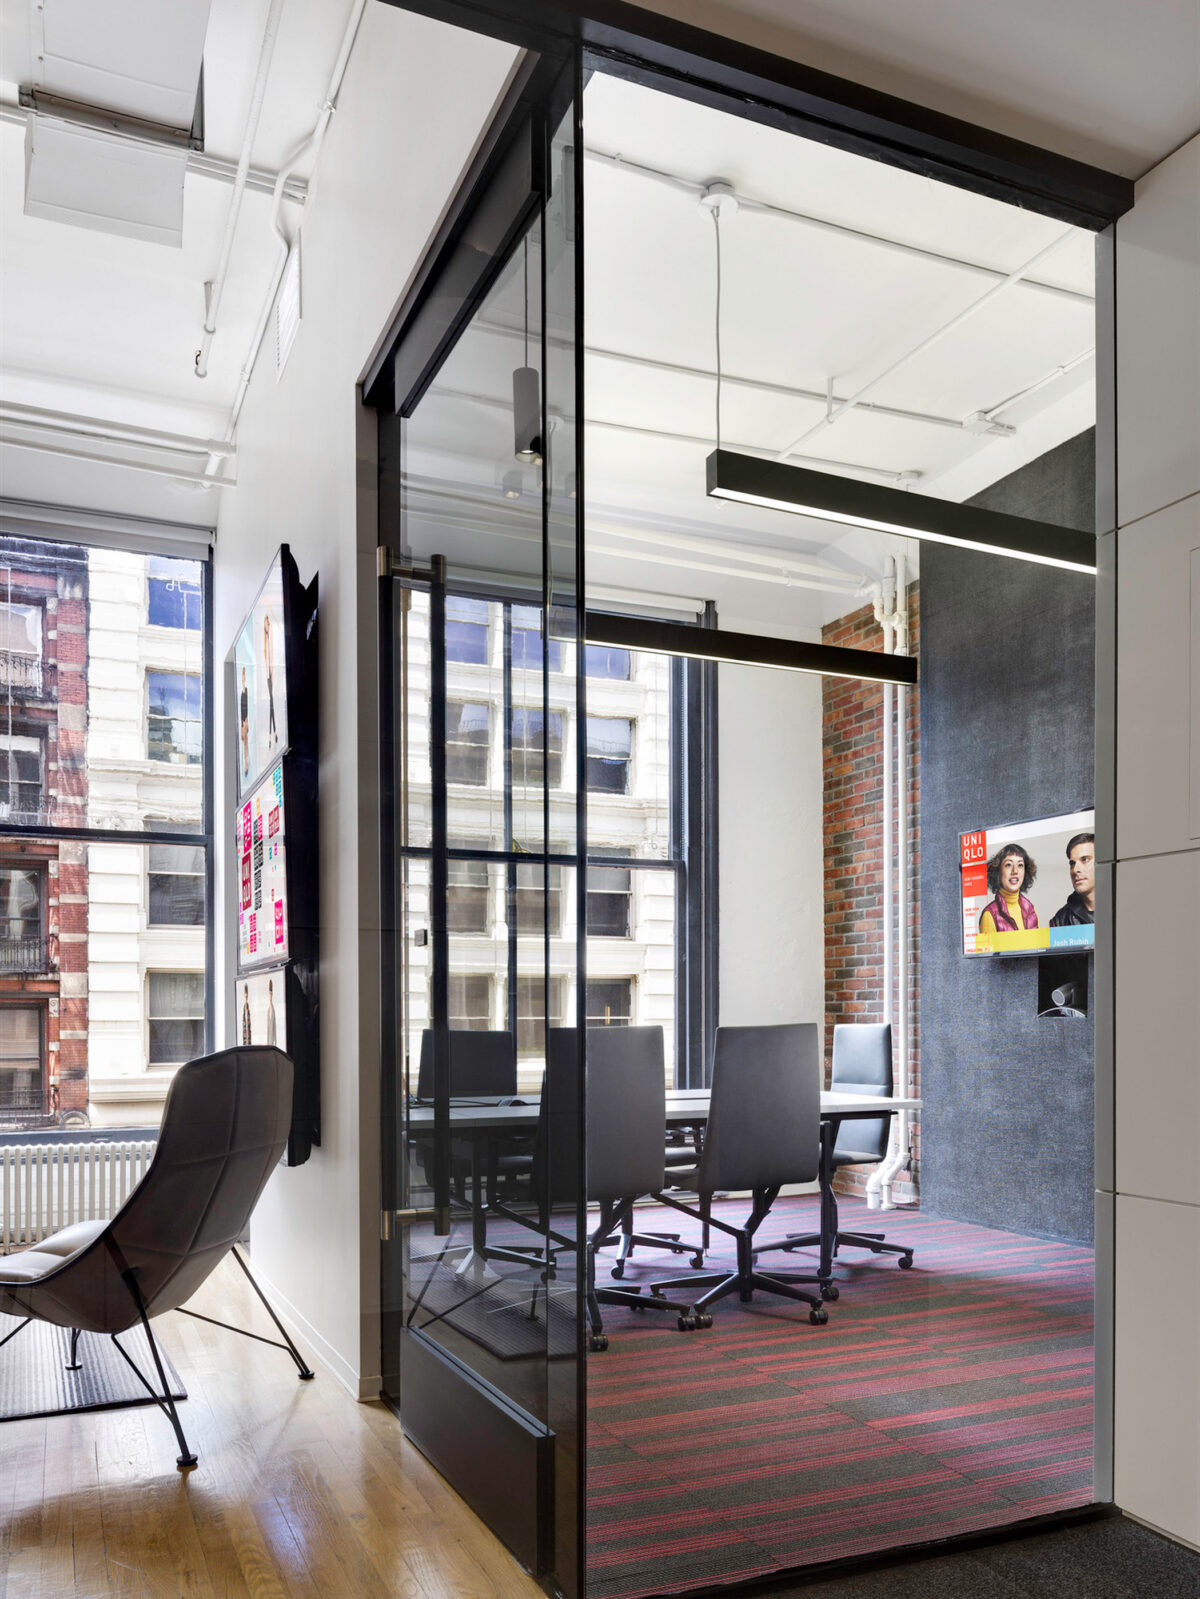 Modern office space highlighted by natural light, featuring a glass partition, sleek black frame, contemporary furnishings, and an exposed brick wall, complemented by a vibrant red patterned area rug.